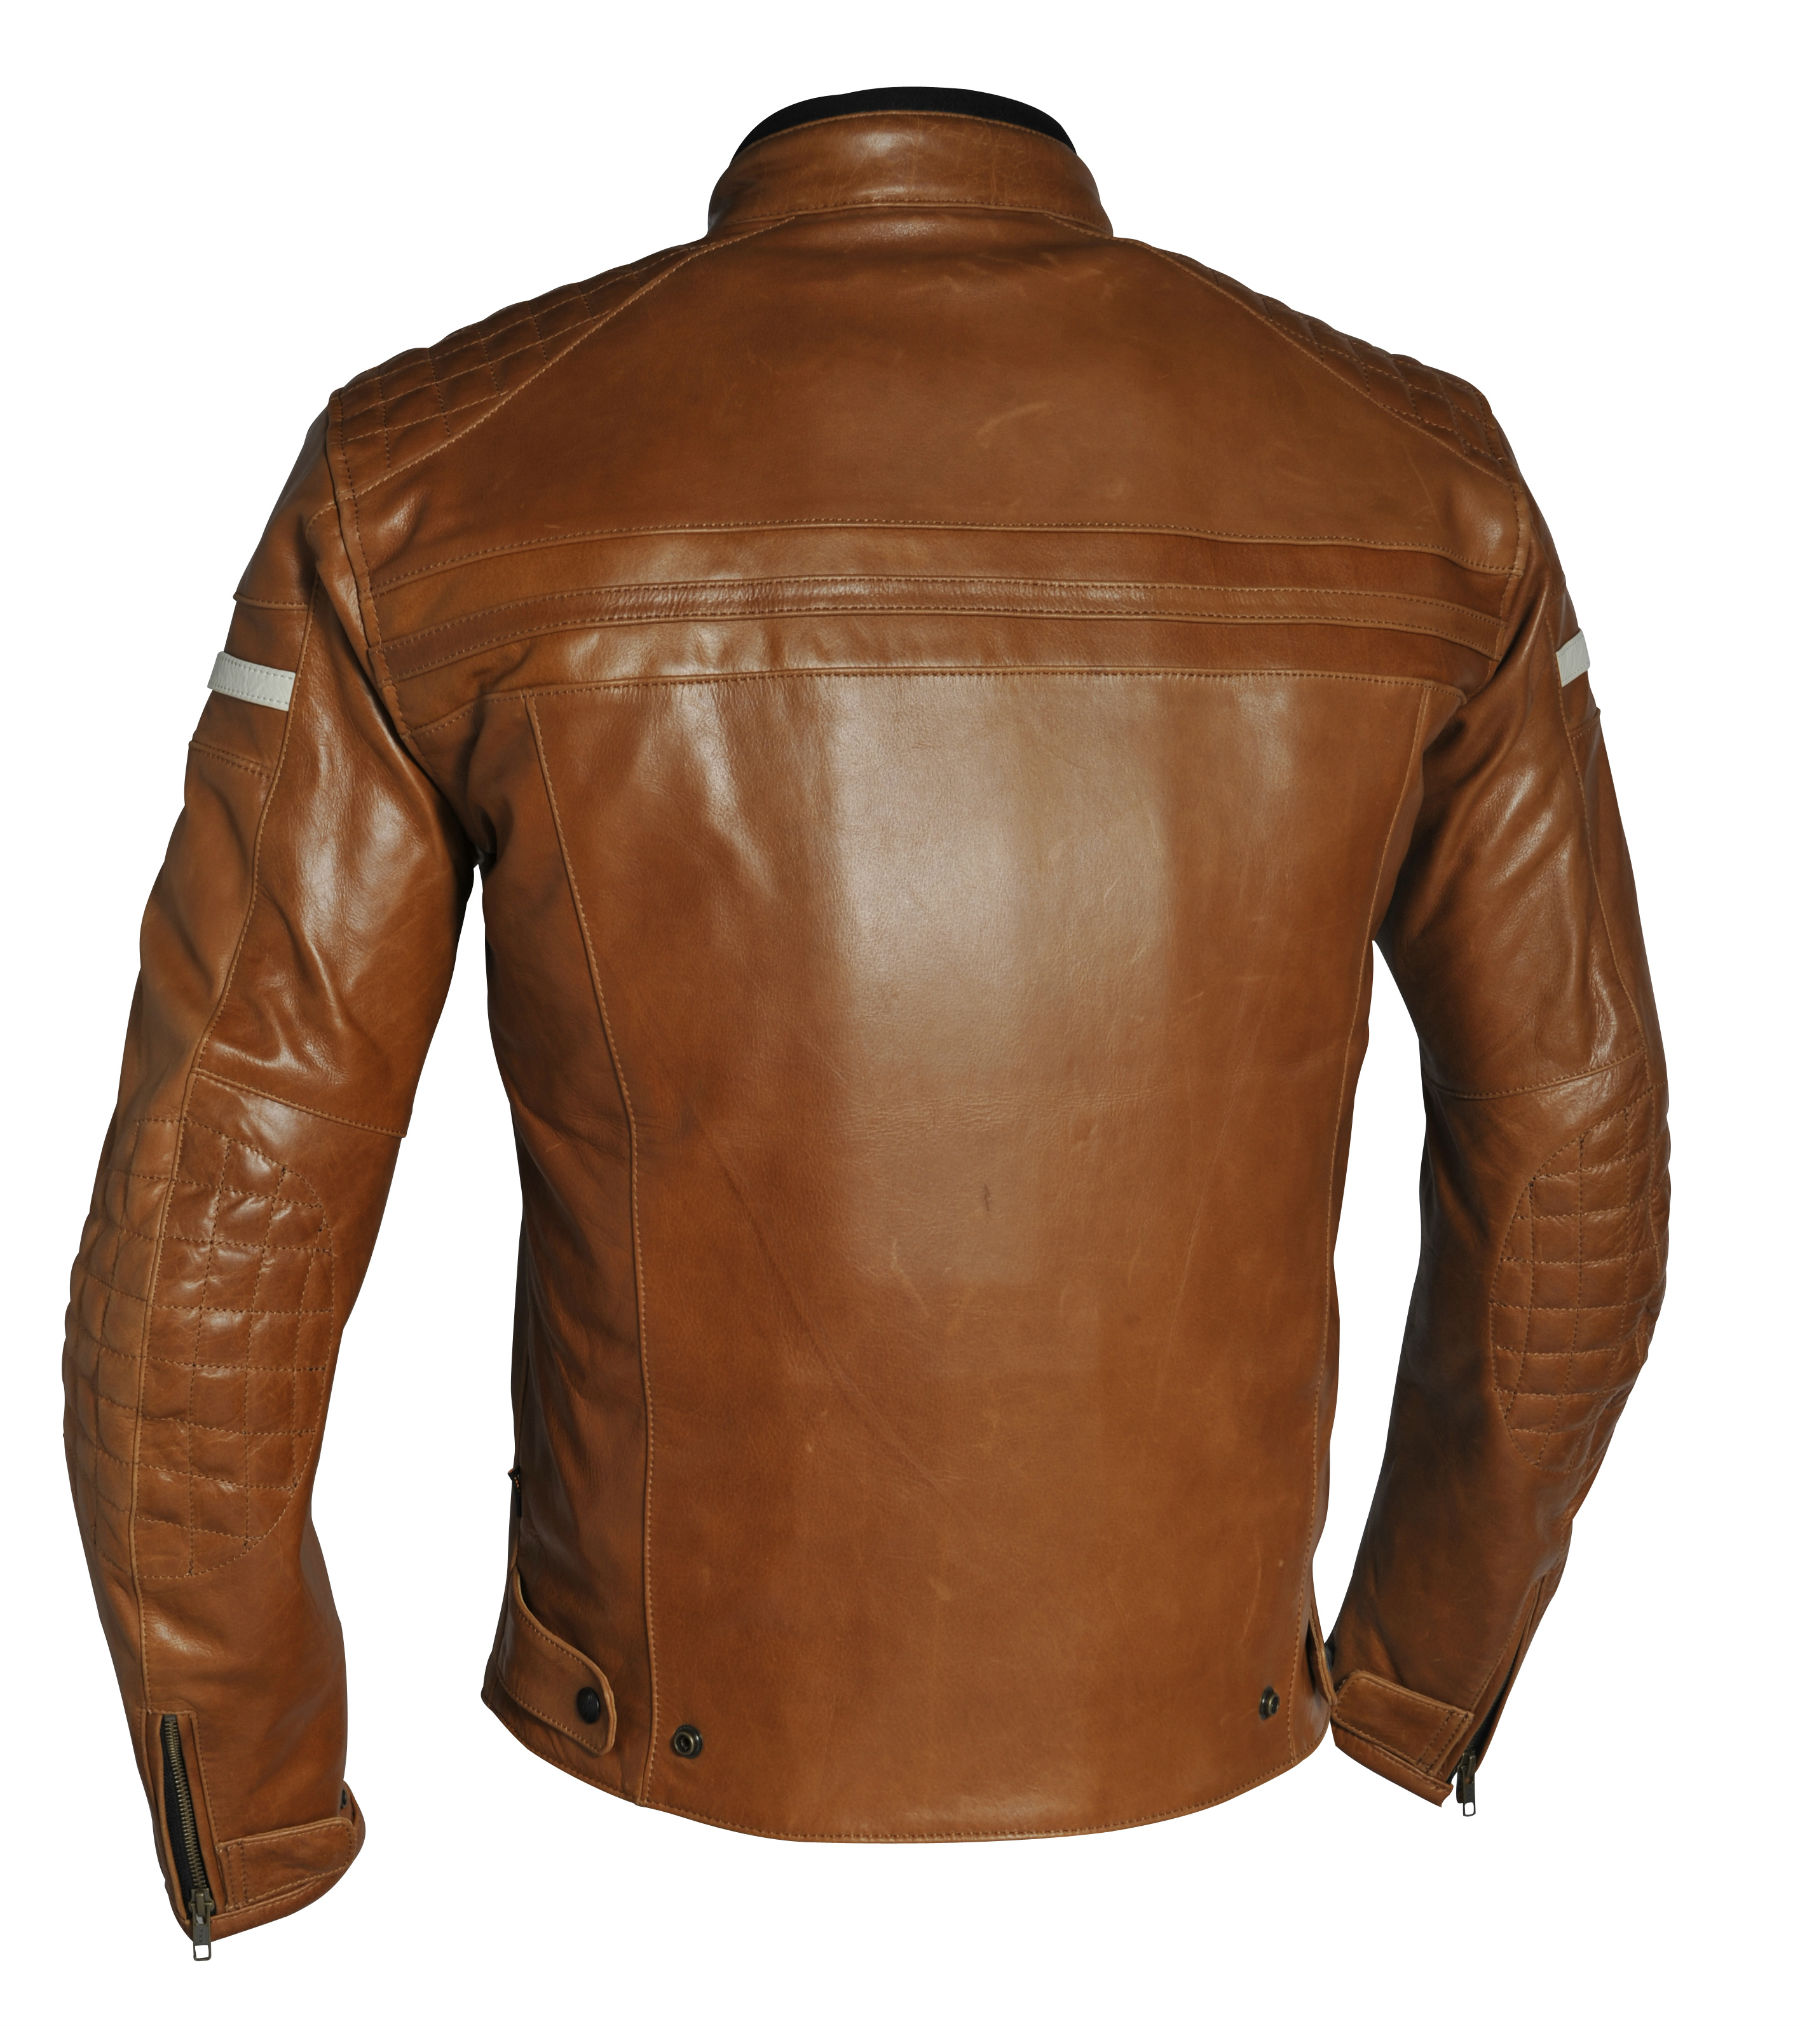 First look: Richa Daytona leather jacket review